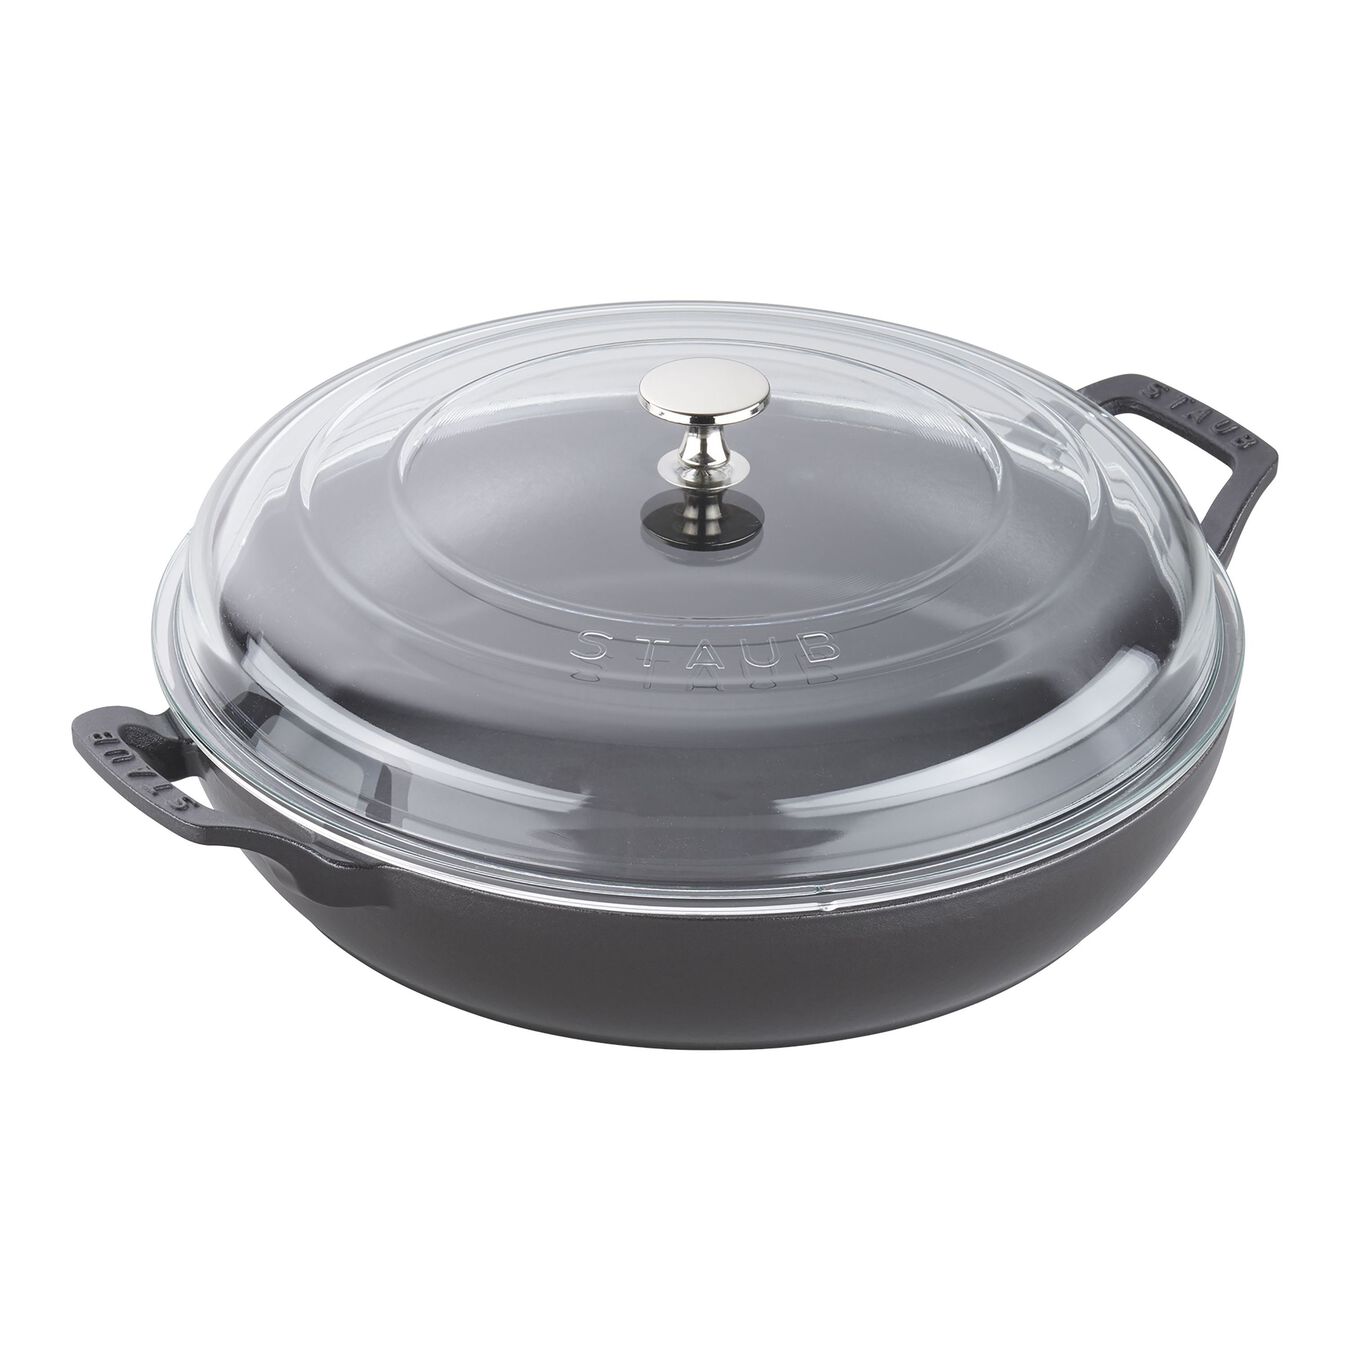 3.5 l cast iron round Saute pan with glass lid, black - Visual Imperfections,,large 1